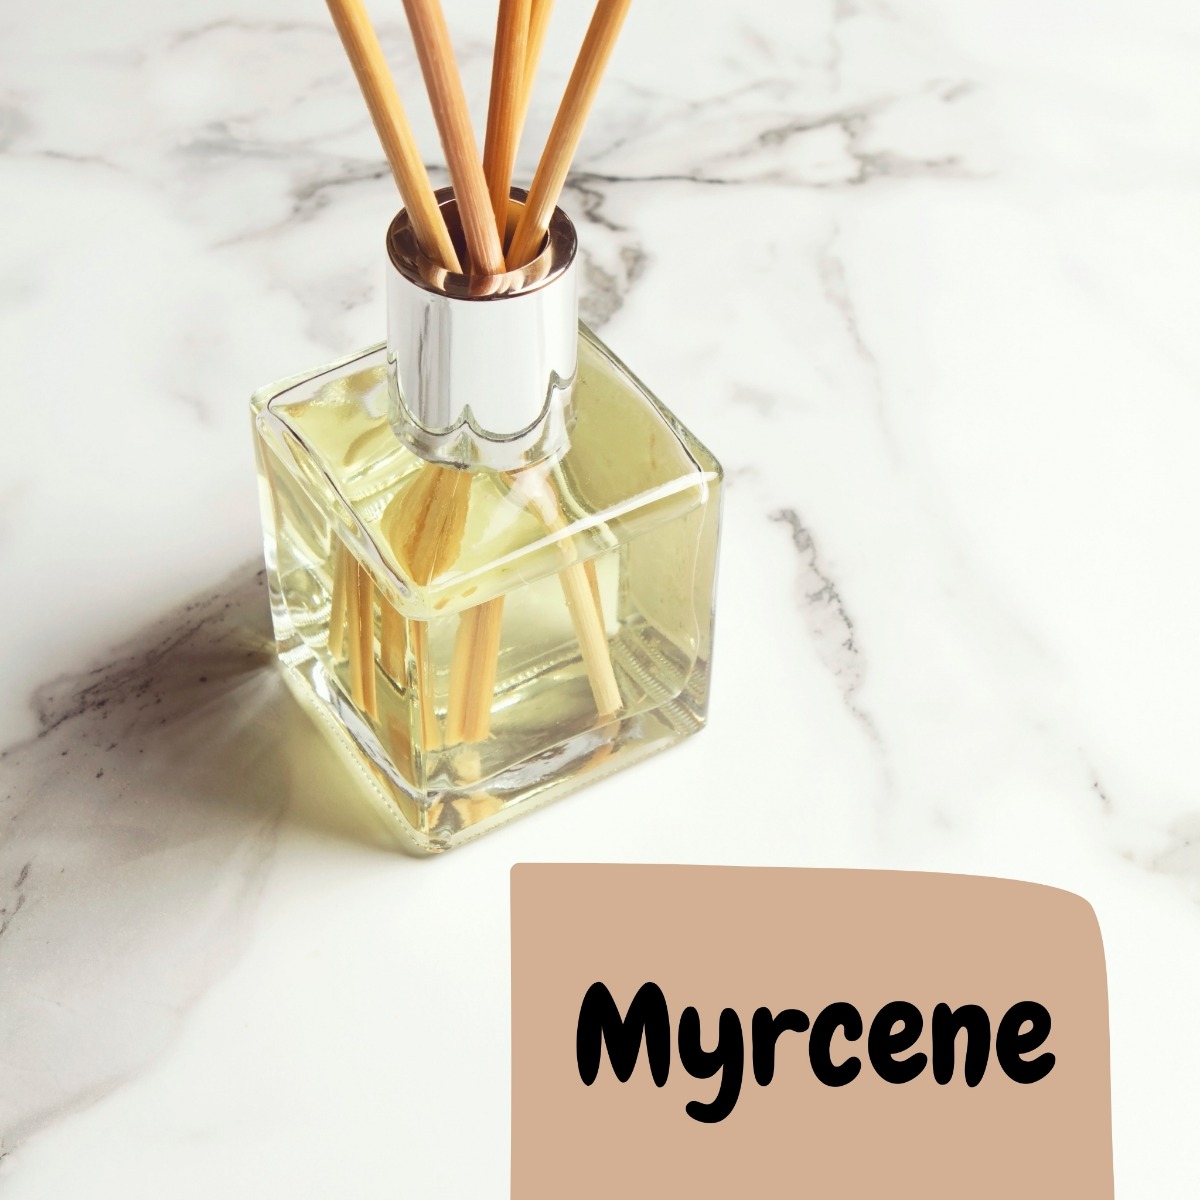 oil sense in the room vibe with text saying Myrcene